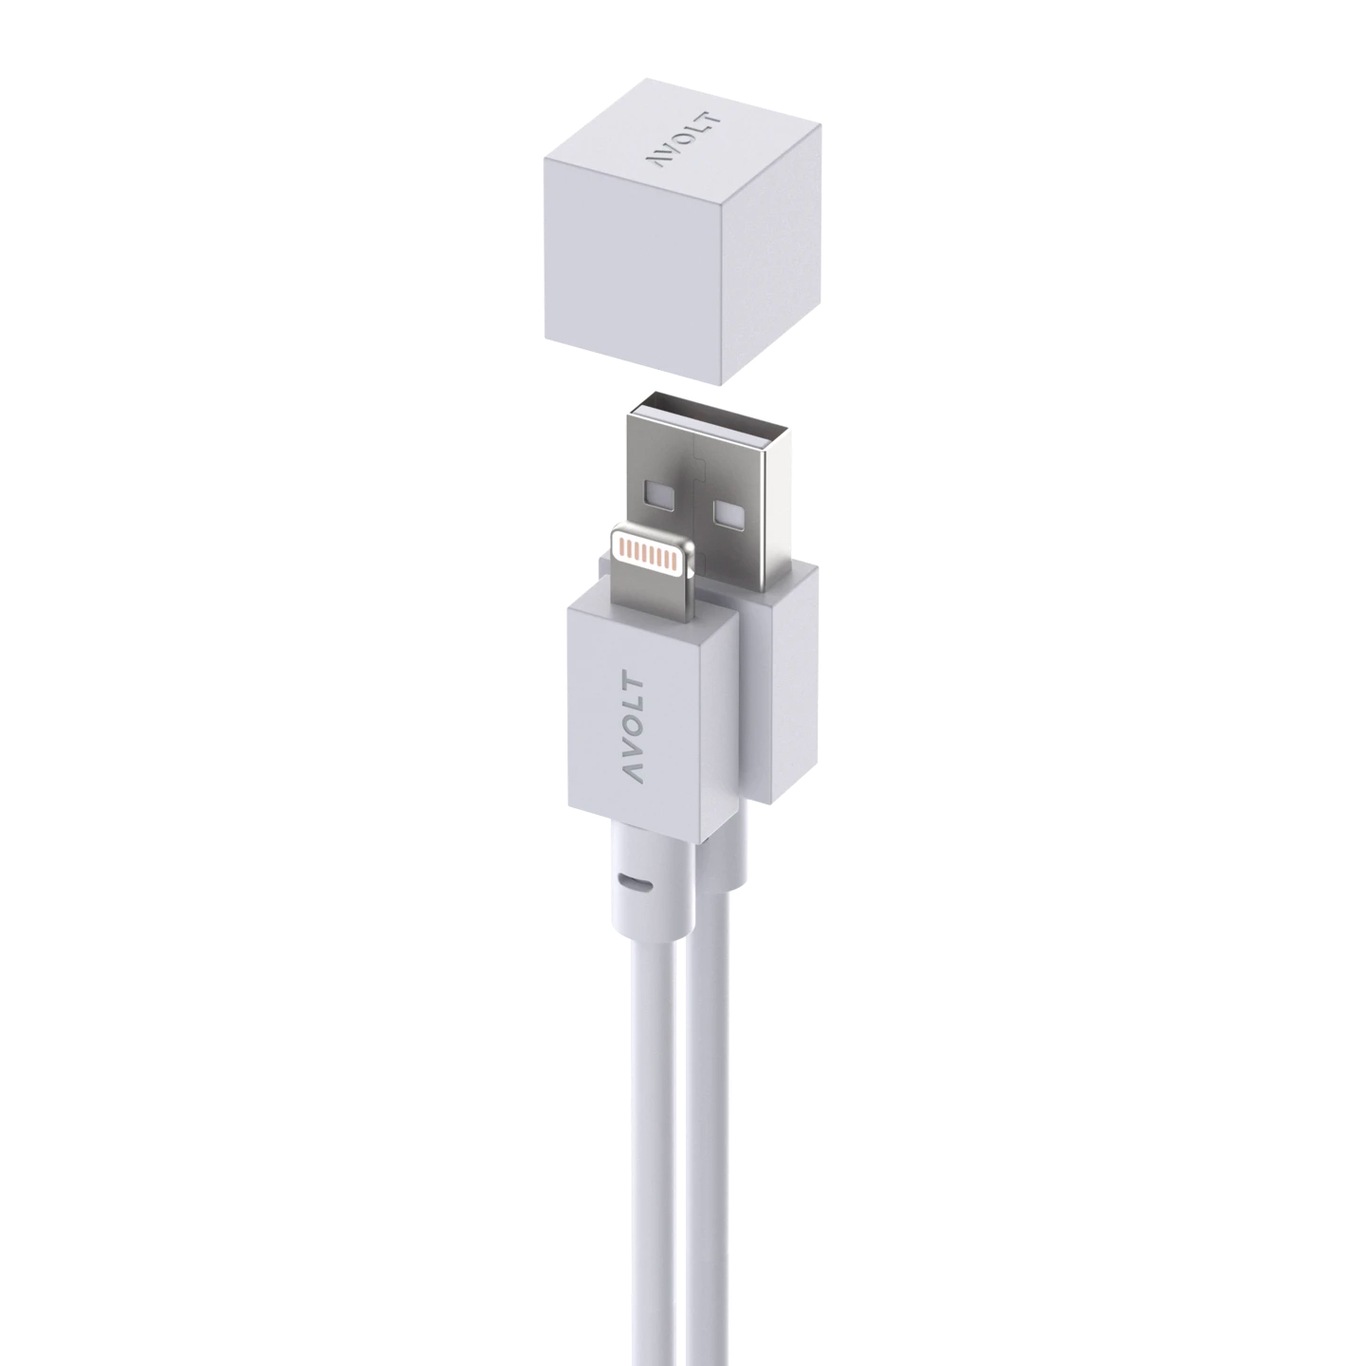 Cable 1 Charging Cable Lightning / Usb Type A 1,8 m, Gotland Grey